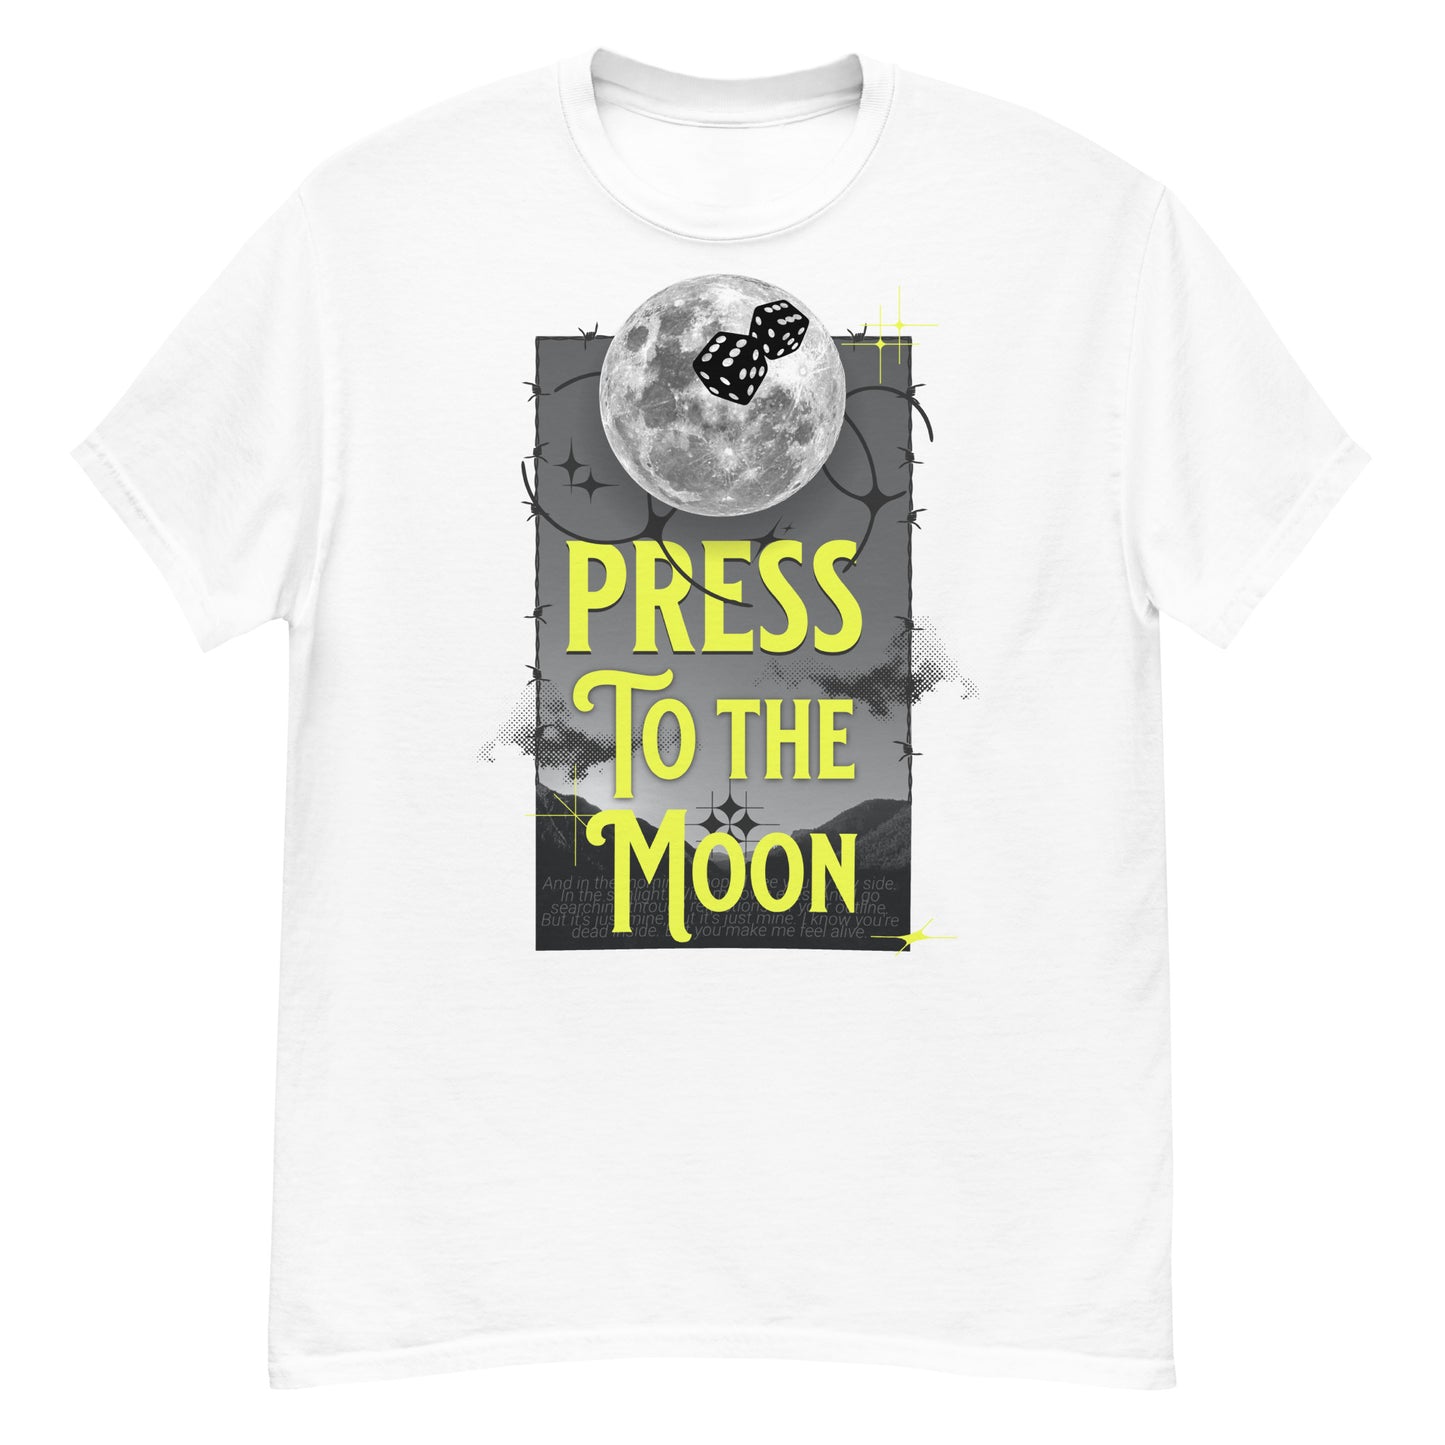 Press to the moon